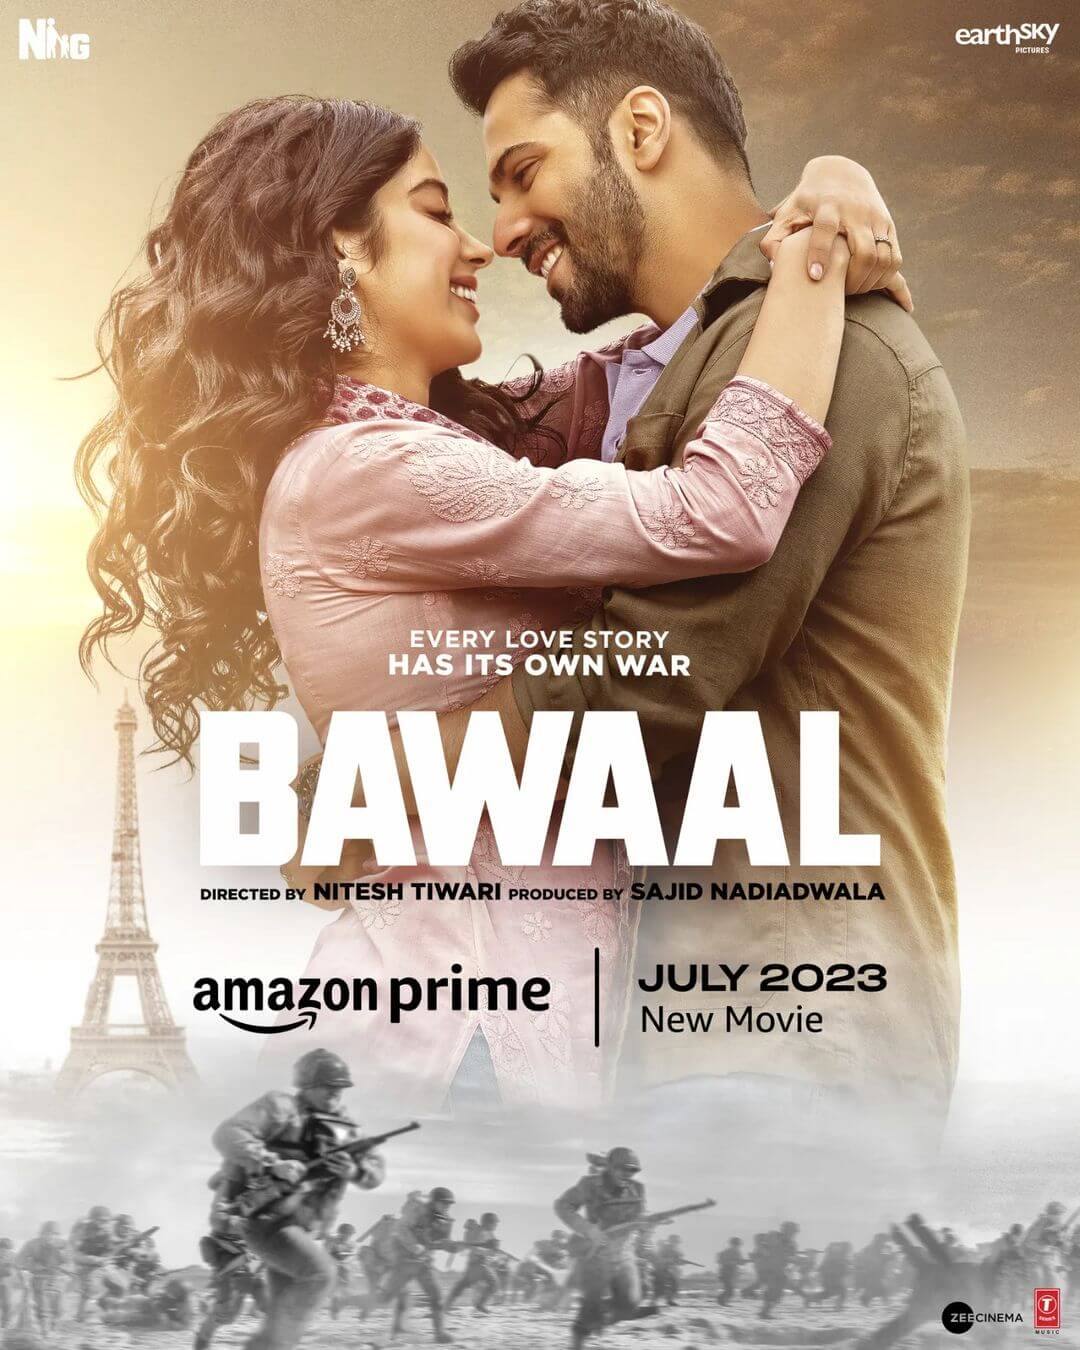 Hot July 2020 Films From Bollywood And Beyond: